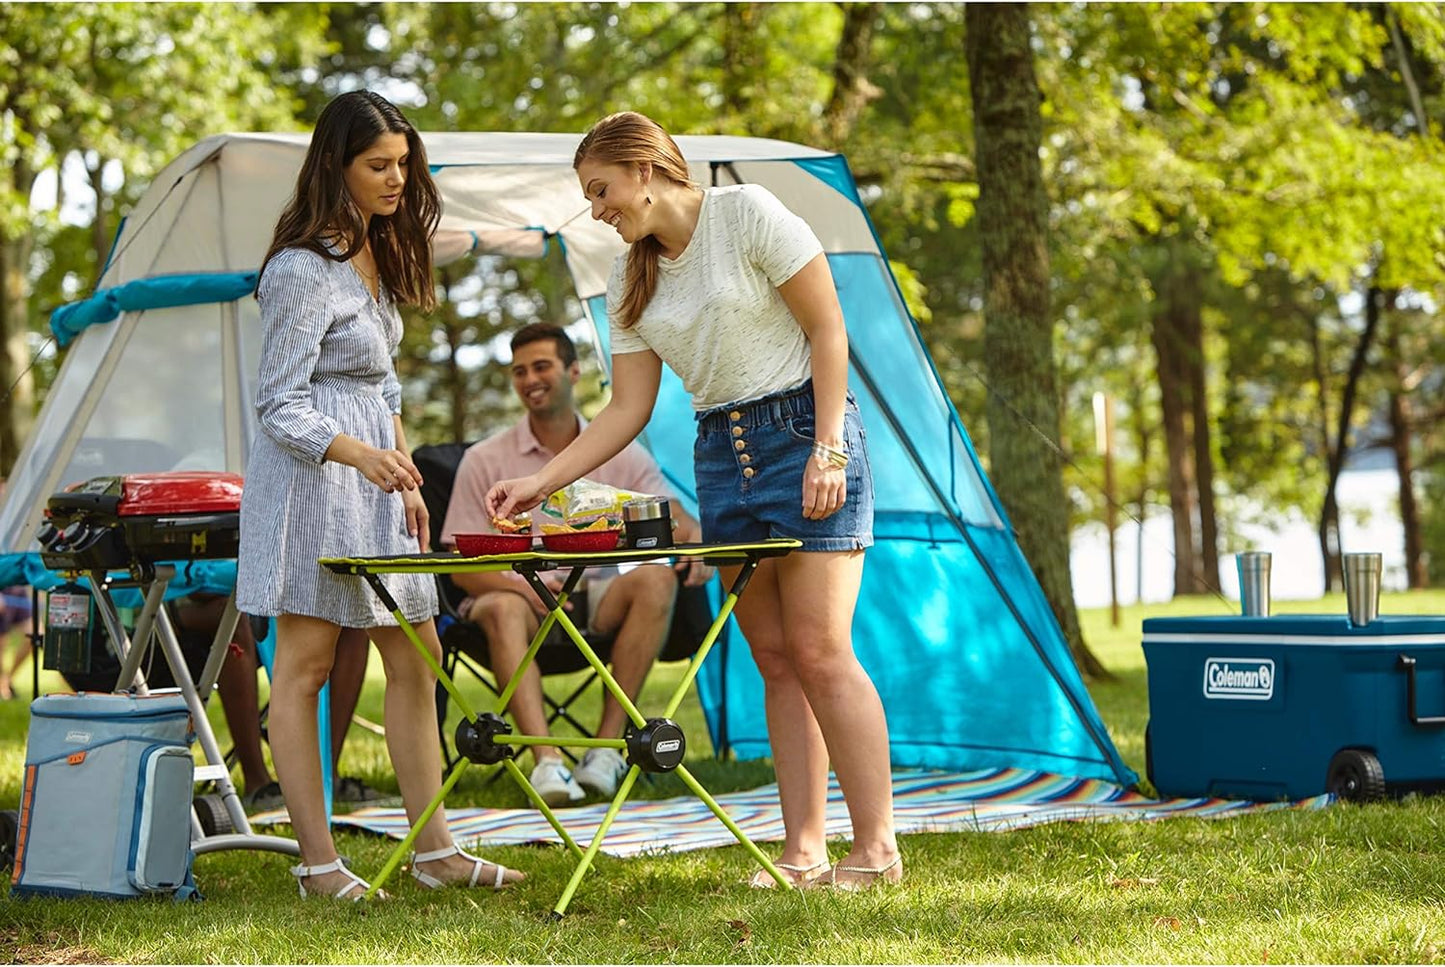 Coleman Mantis Space-Saving Outdoor Camp Furniture, Chair\/Cot\/Table More Storage Space Than Normal, Great for Camping, Tailgating, Backyard, & More, Carry Bag Included